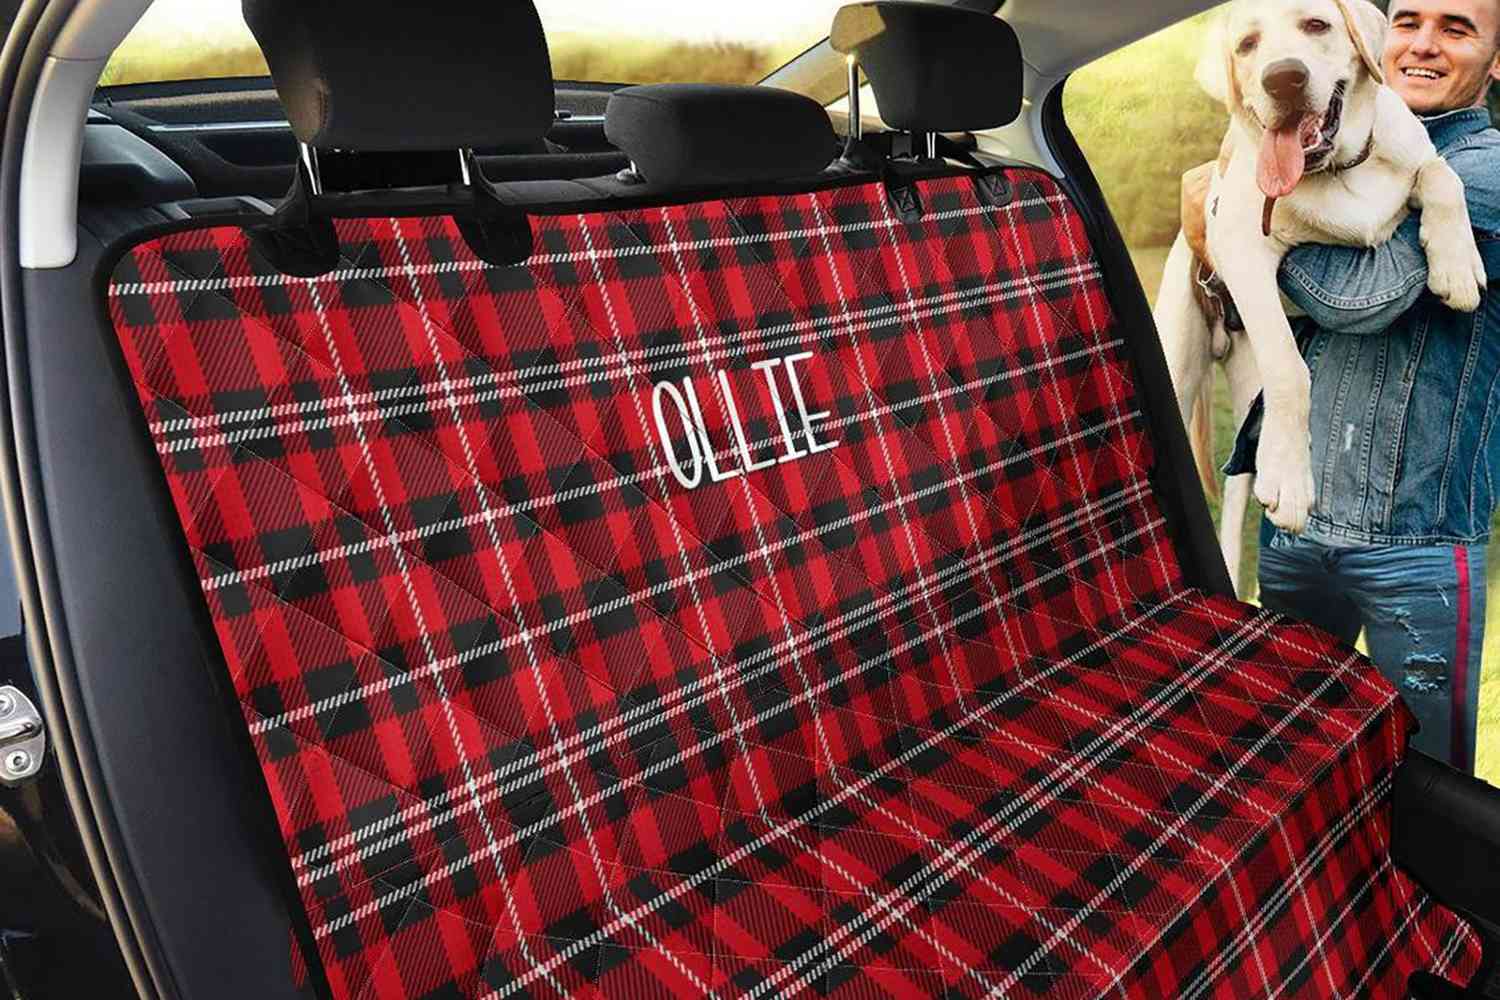 Plaid monogramed car seat cover covers back of car, ready for yellow lab